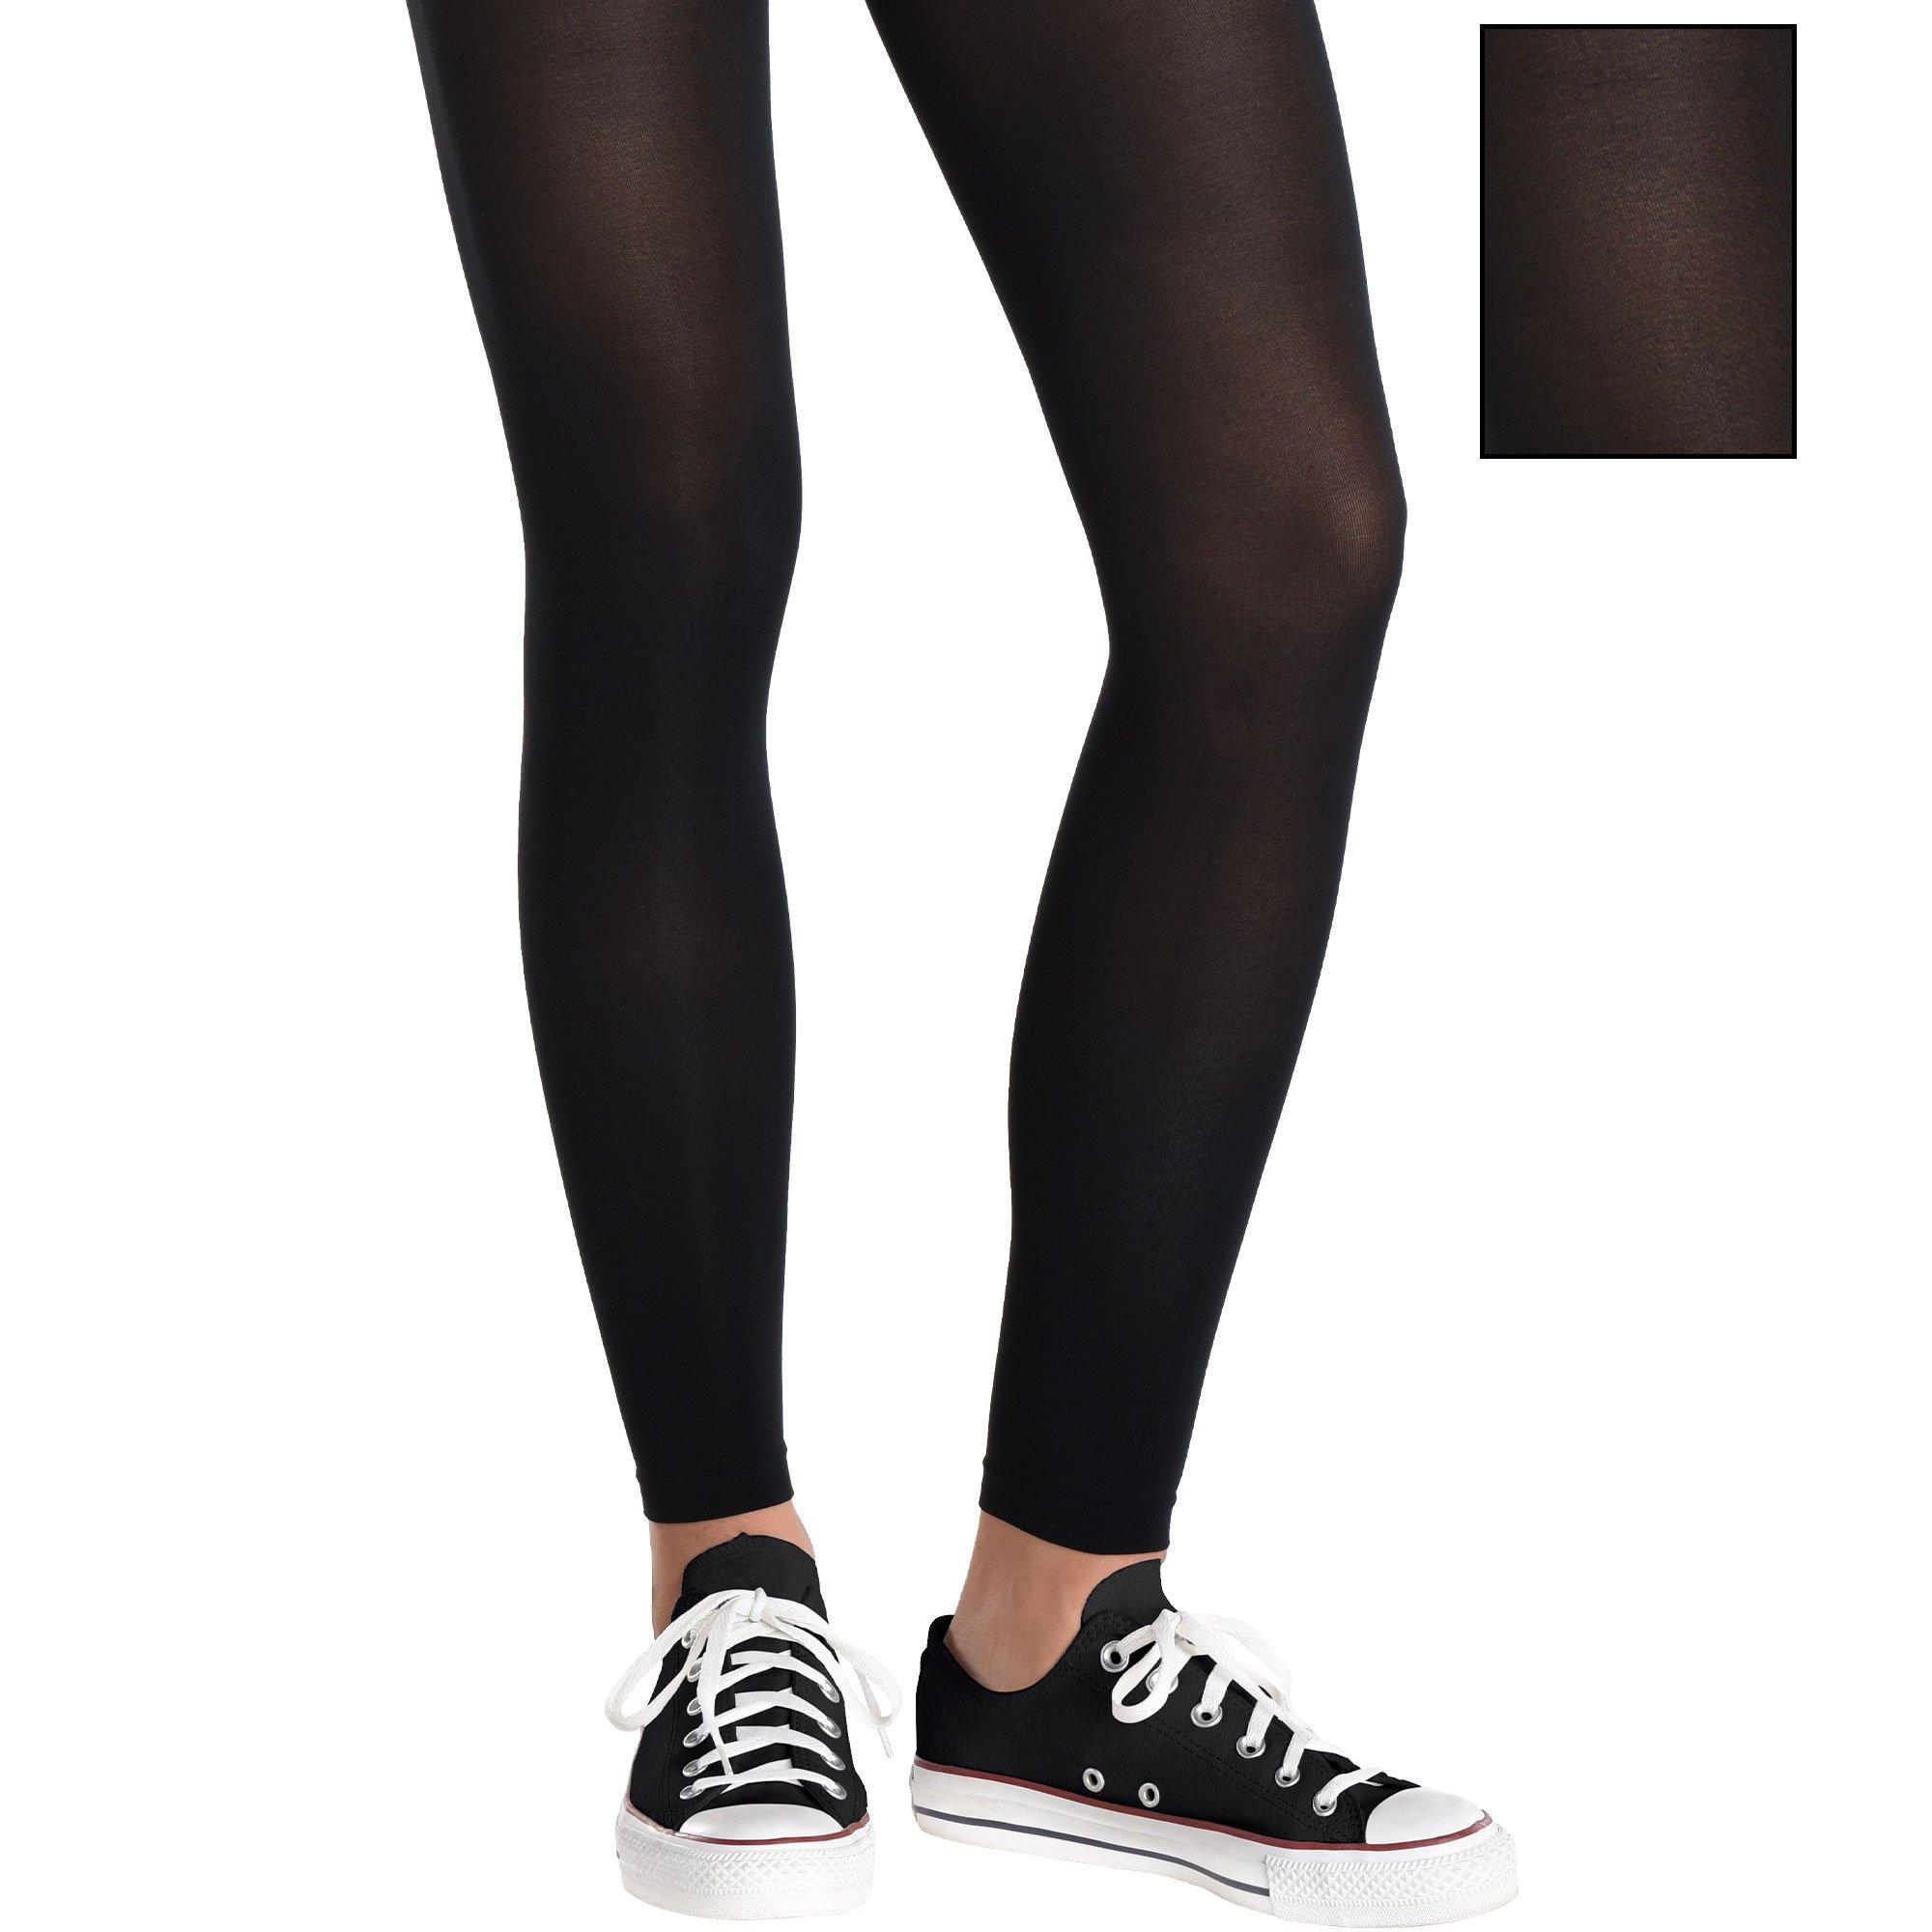 Black Tights for Girls